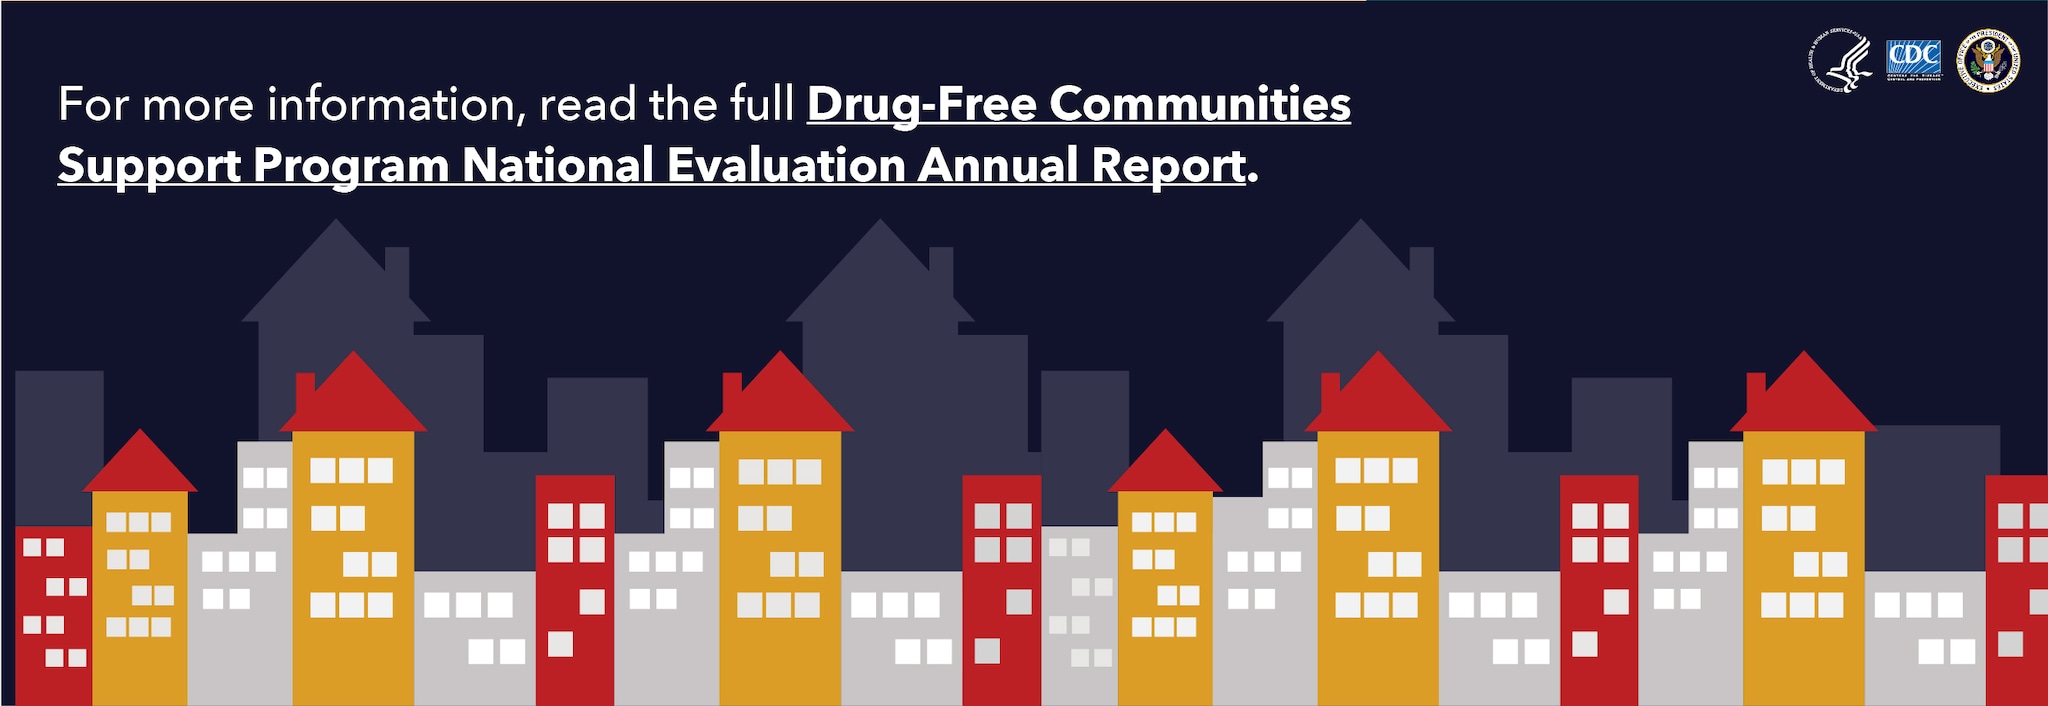 For more information, read the full Drug-Free Communities Support Program National Evaluation Annual Report.